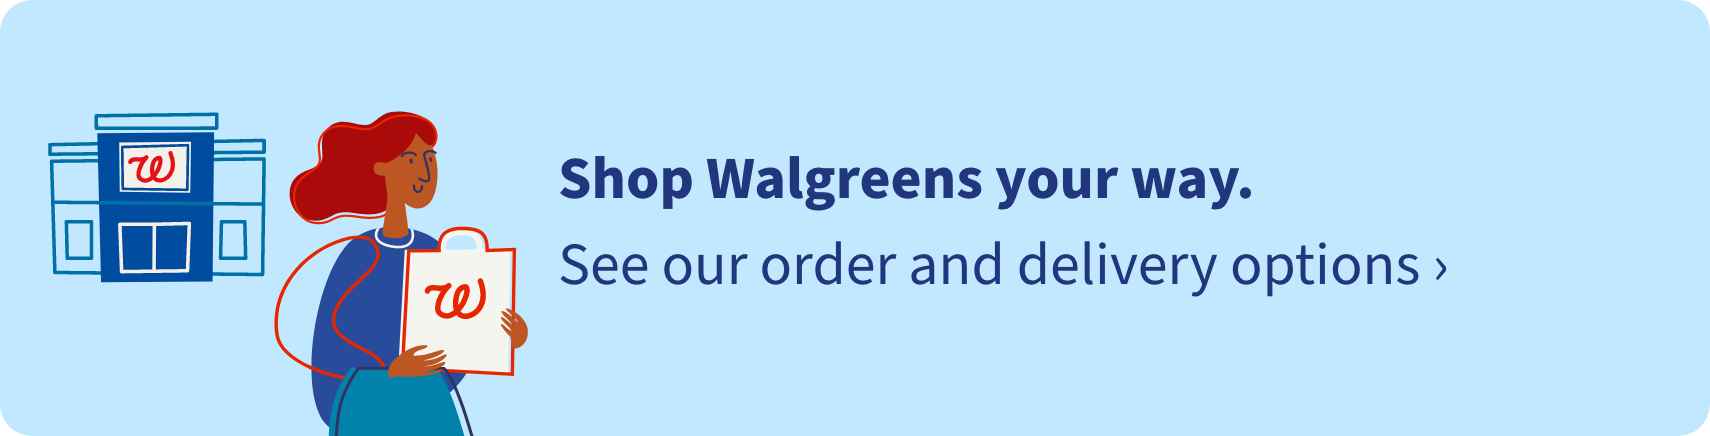 Shop Walgreens your way. See our order and delivery options